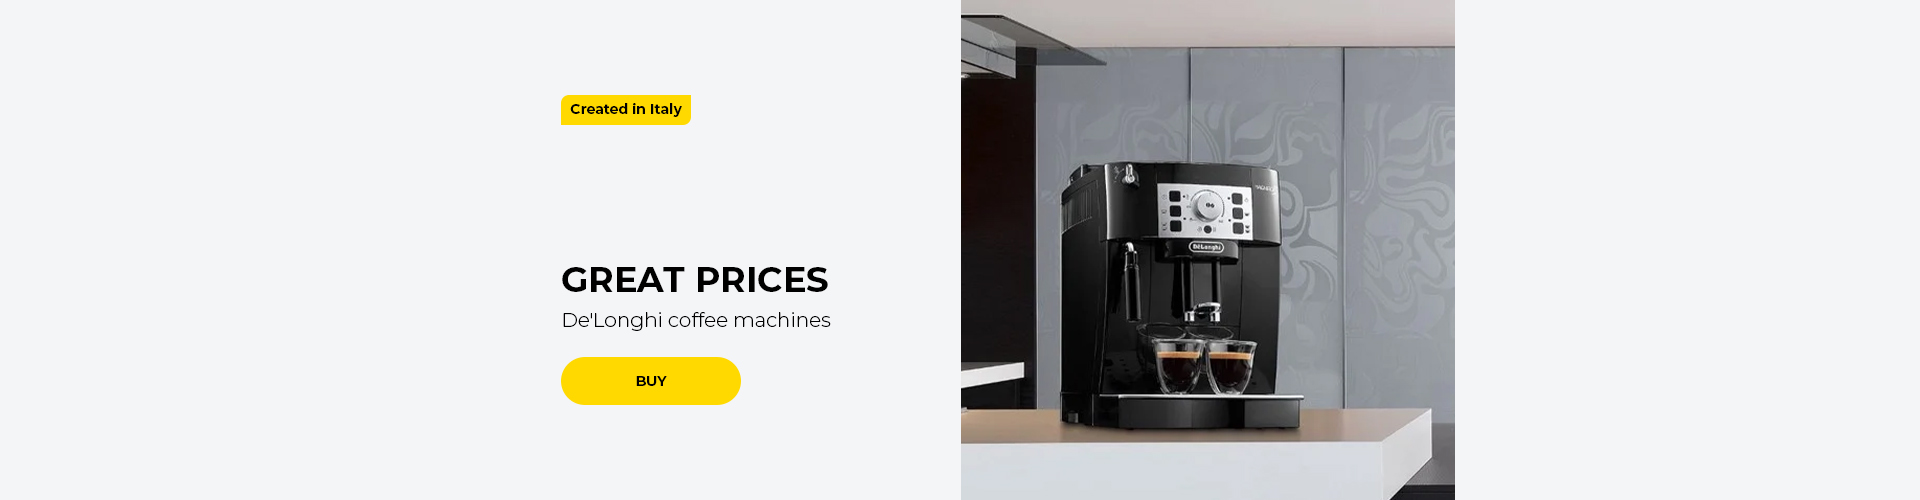 GREAT PRICES De'Longhi coffee machines